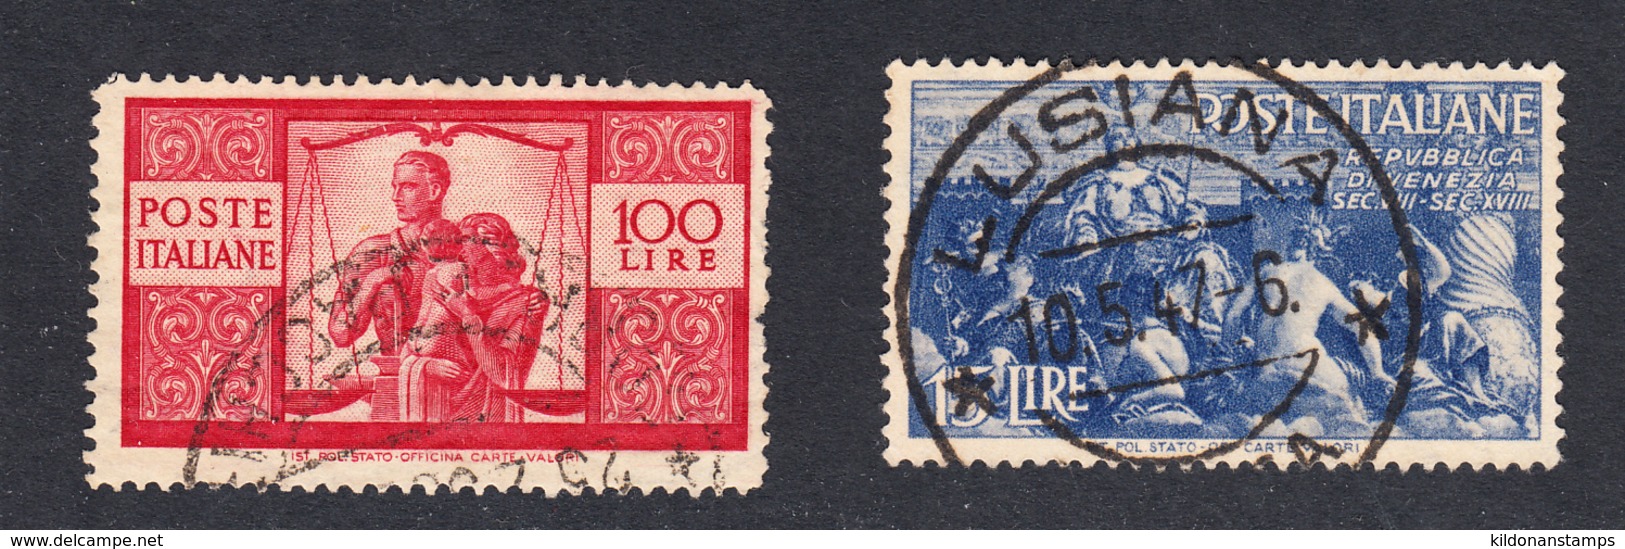 Italy 1946 Cancelled, Sc# 477,484 - Used